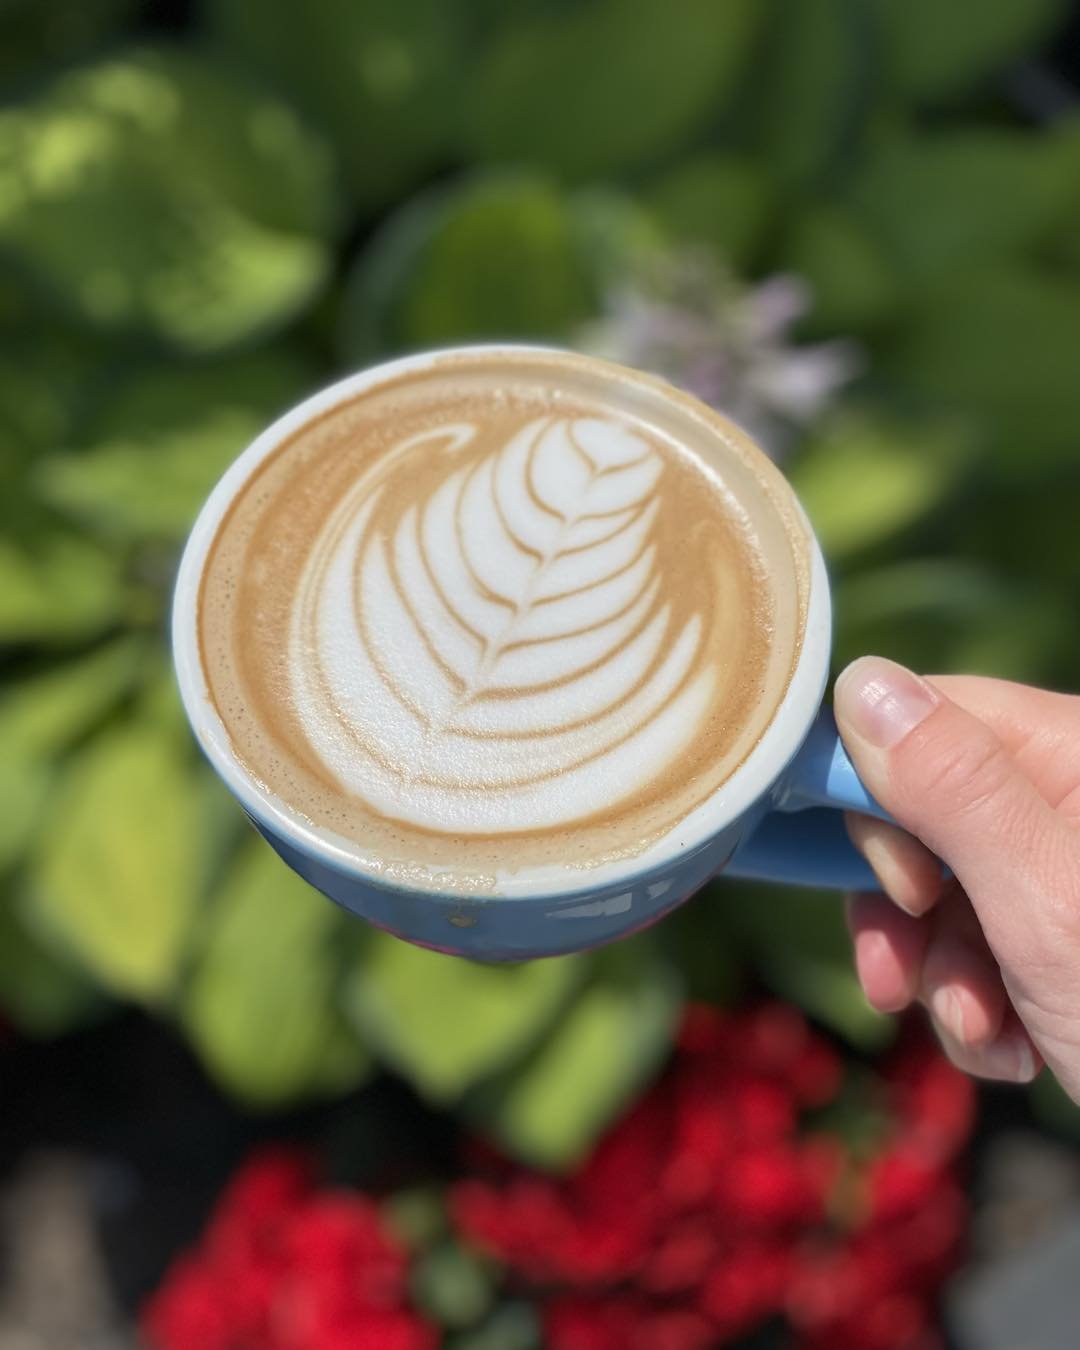 happy Friday 🙌

celebrate by drinking some coffee ☕️ 

#friday #fridayvibes #fridayfeeling #fridaymood #fridayfeels #fridaymotivation #morningroutine #espressolove #morningmotivation #espressoshot #morning #visitbuckscounty #morecoffee #coffeedaily 